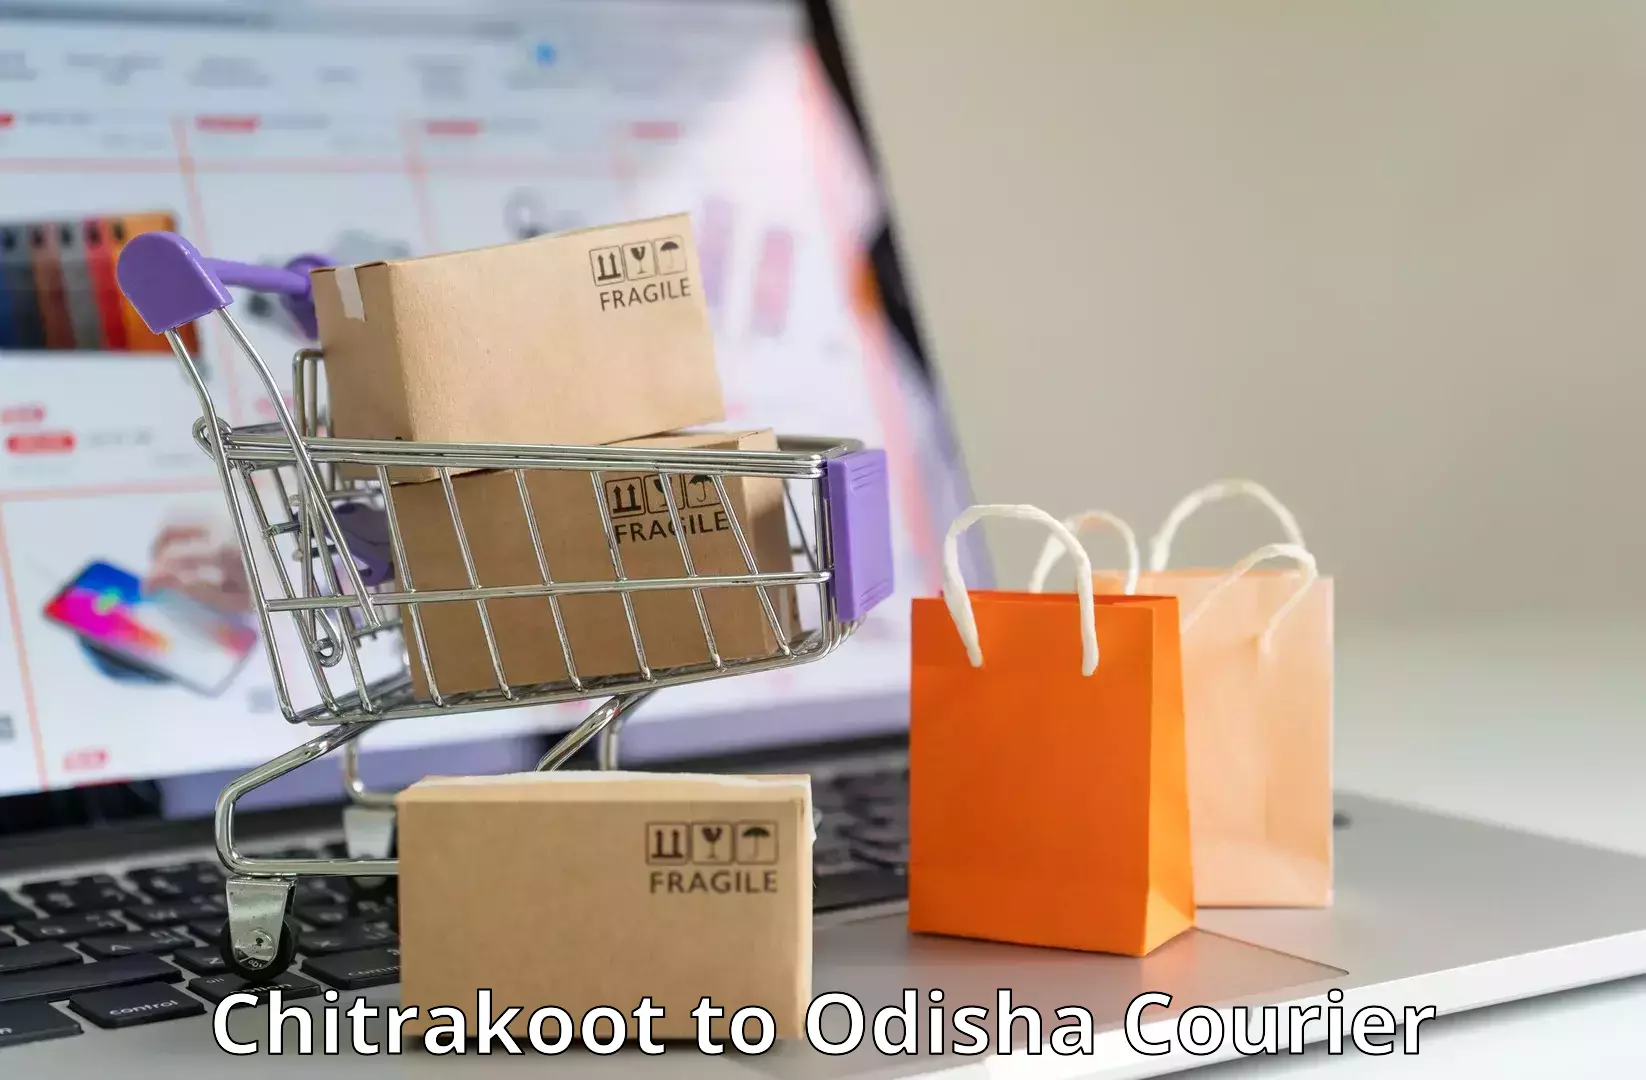 State-of-the-art courier technology Chitrakoot to Semiliguda